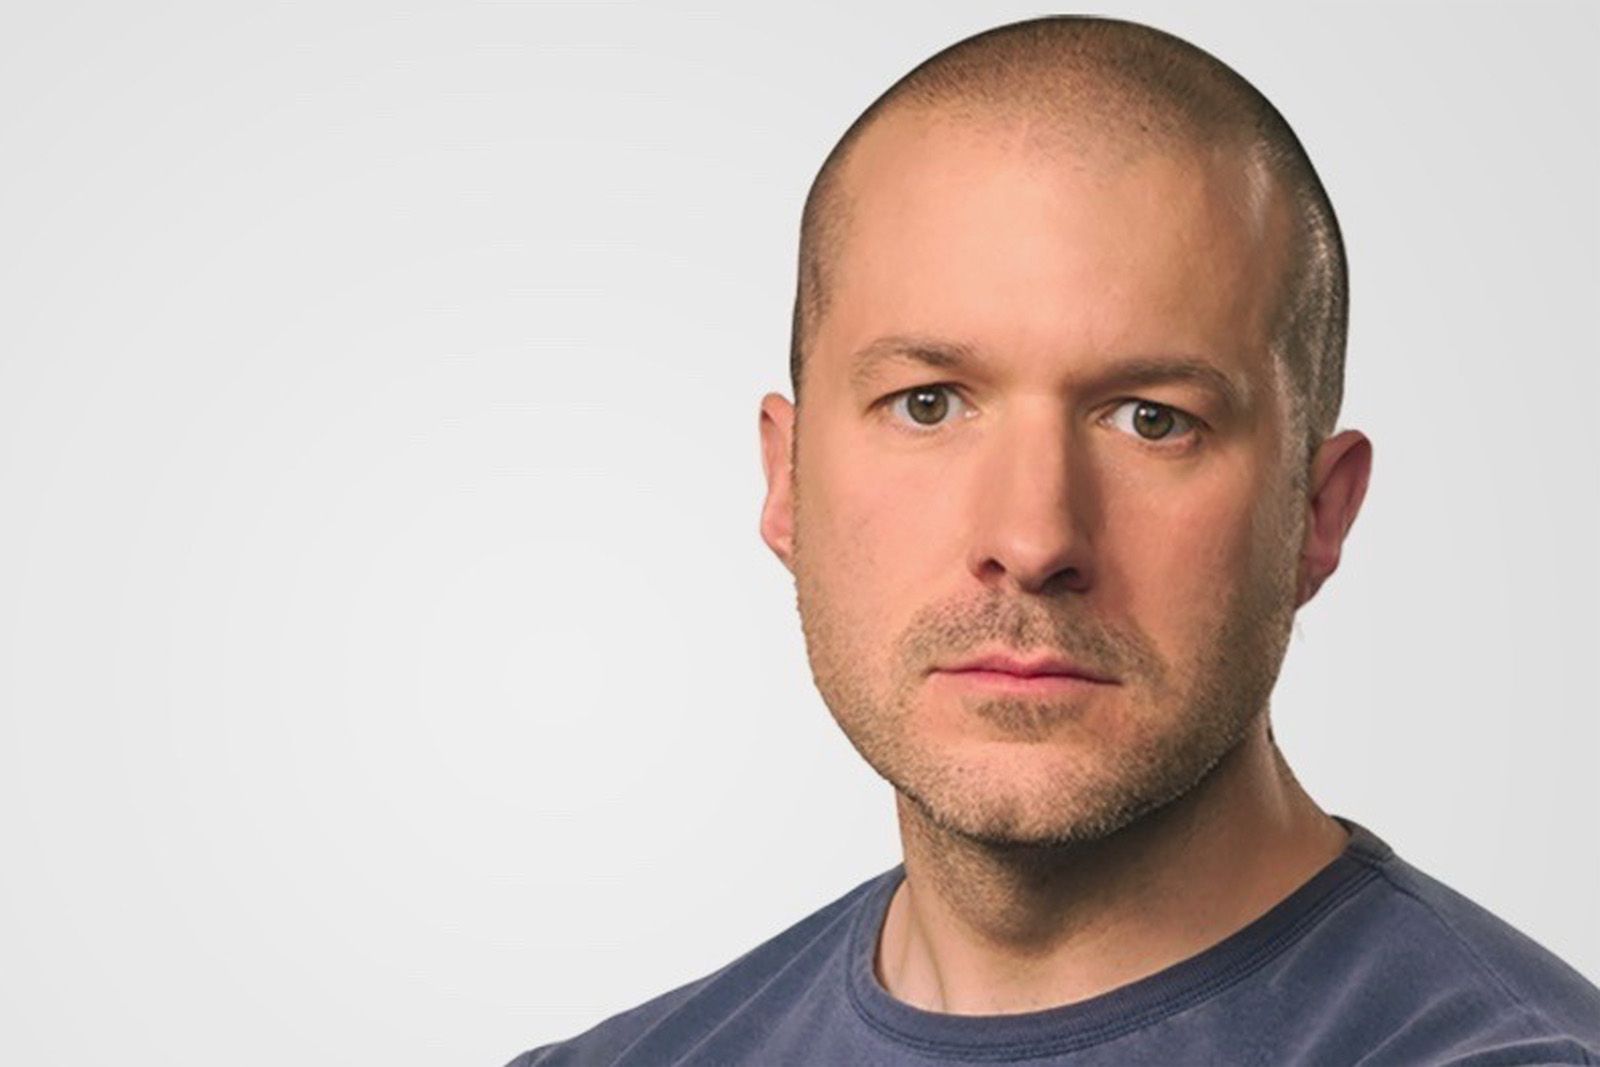 Jony Ive Is Leaving Apple After Nearly Three Decades To Start A Design Company image 1